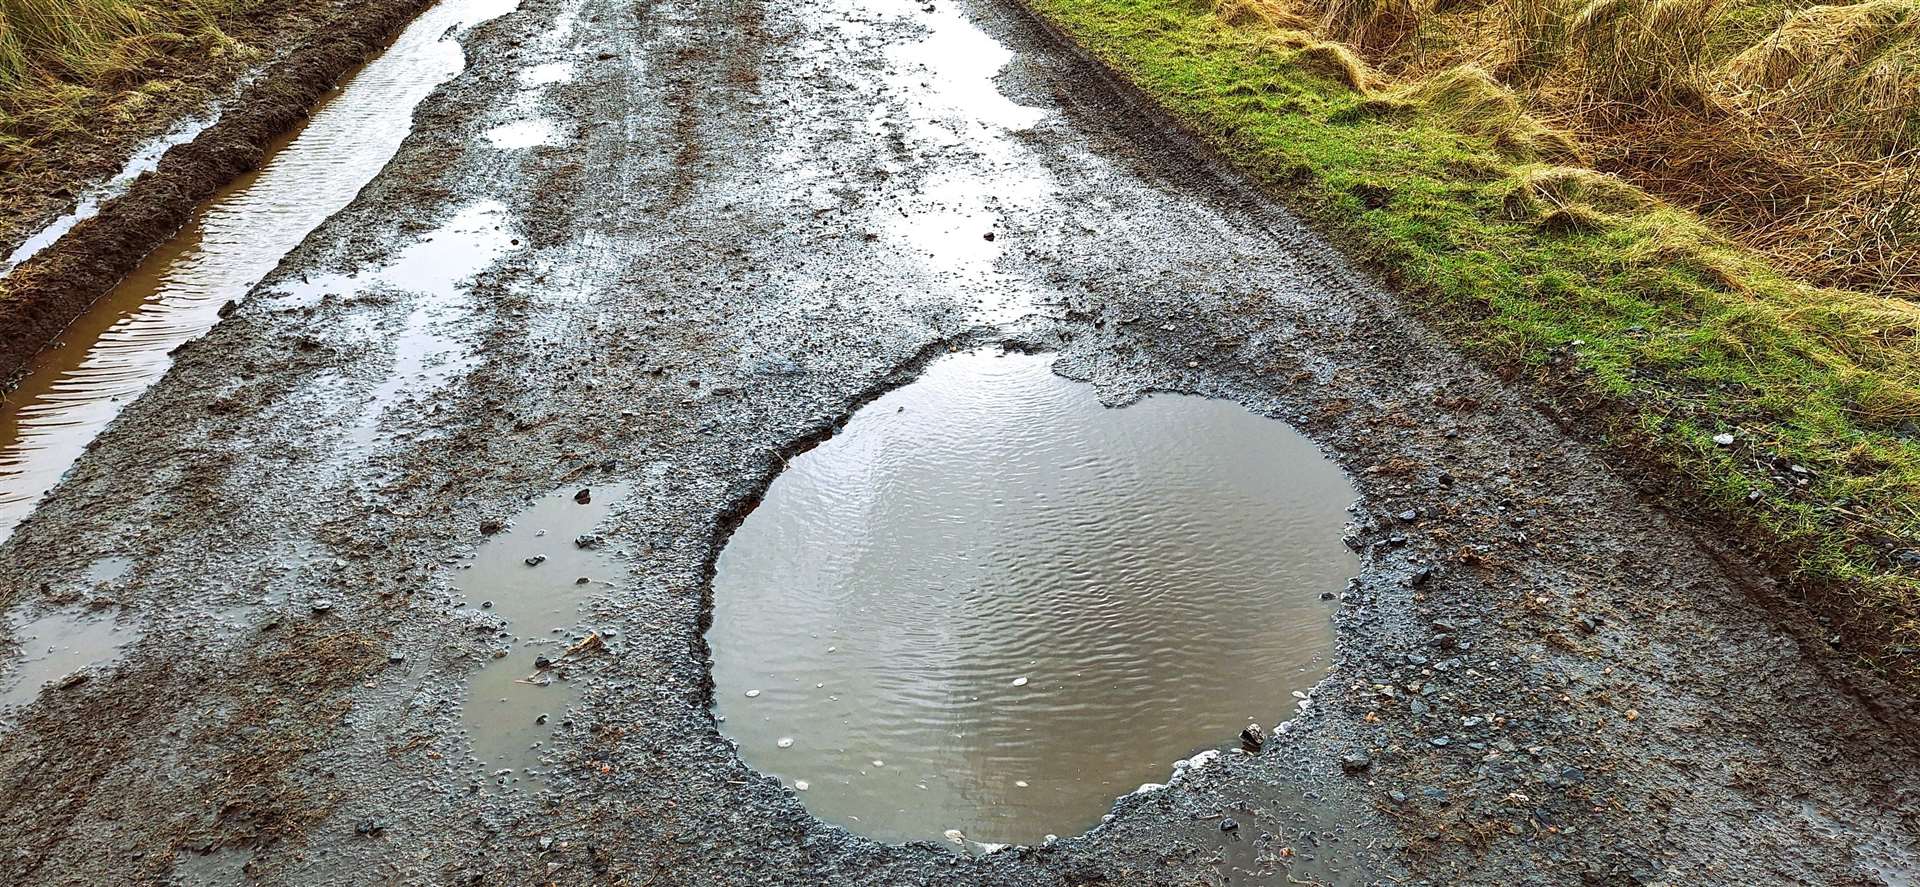 The road has broken down at one side and has a massive, deep pothole that is almost impossible to avoid driving into. Picture: DGS